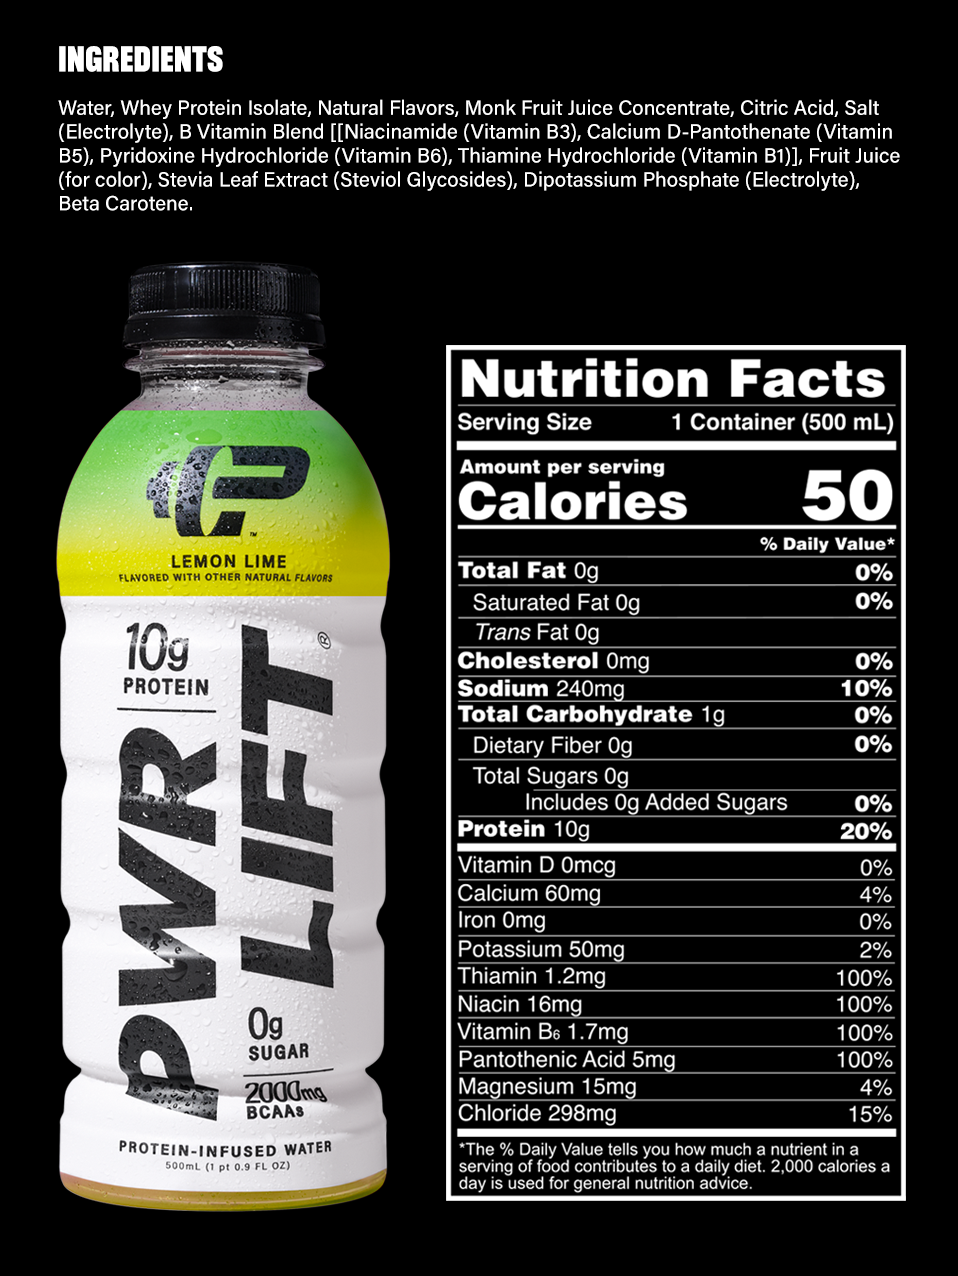 PWR LIFT Lemon Lime Ingredients and Nutritional Facts